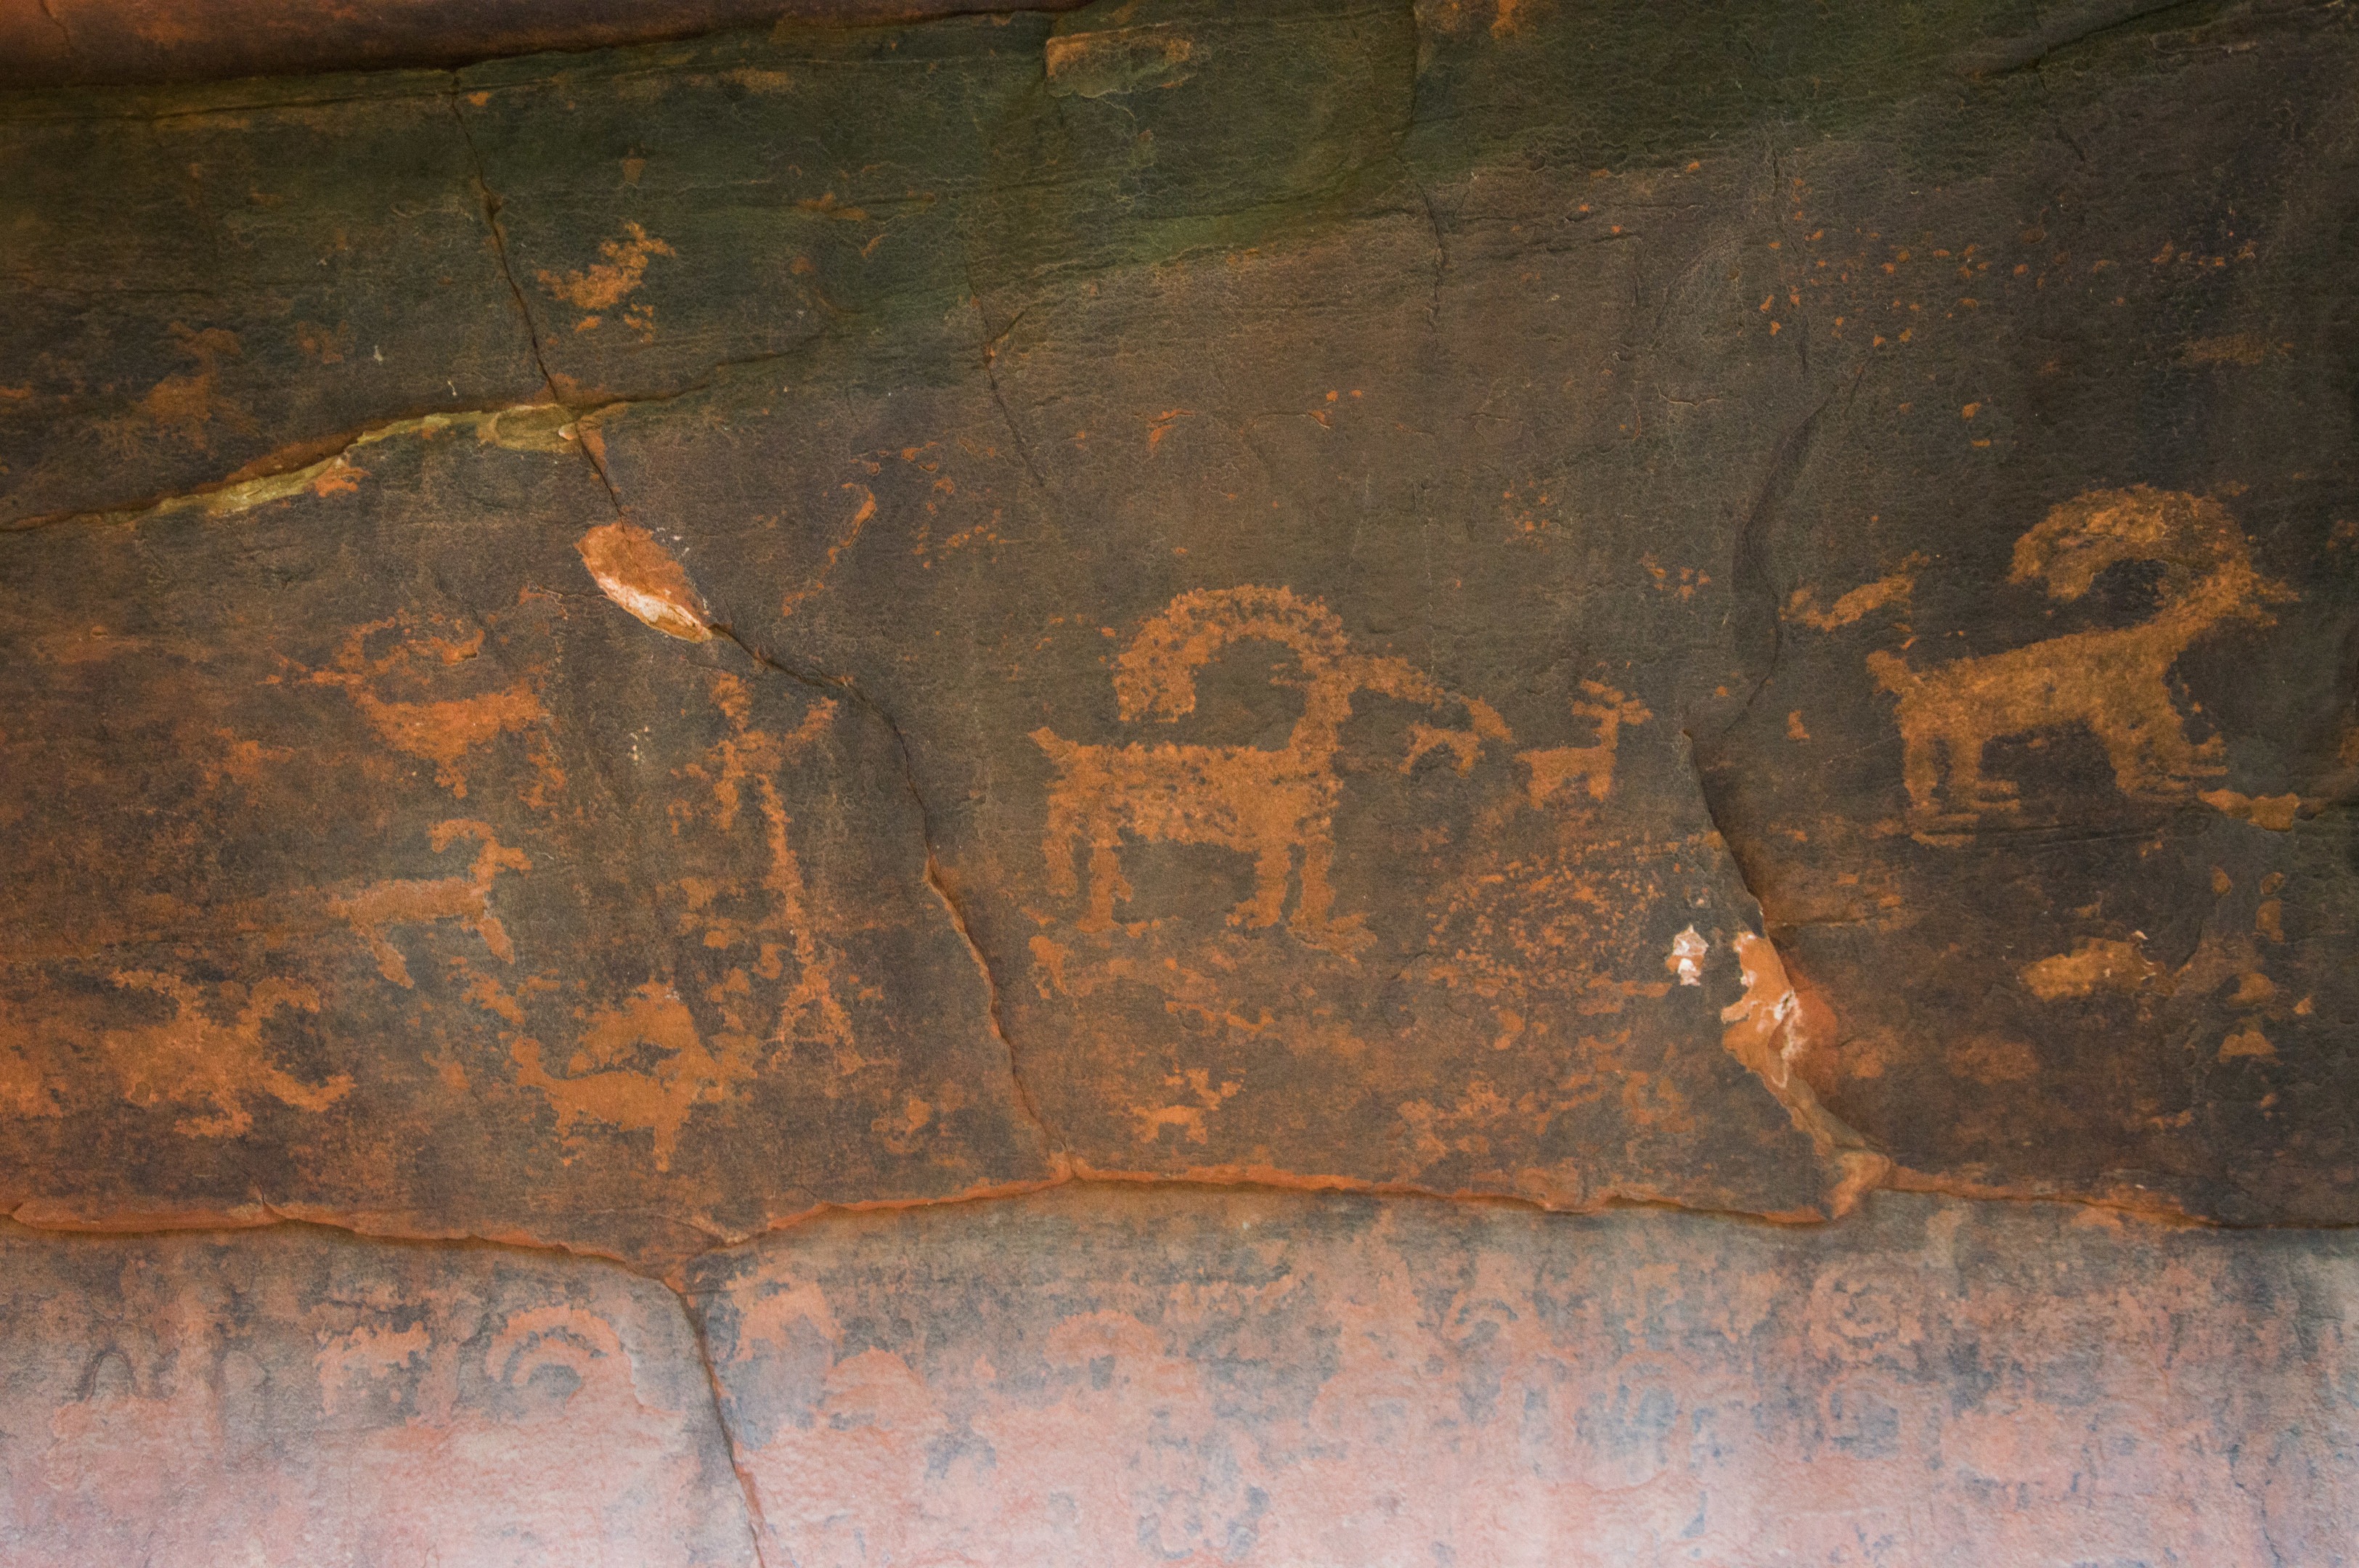 Zion's Petroglyph Canyon | Outdoor Project